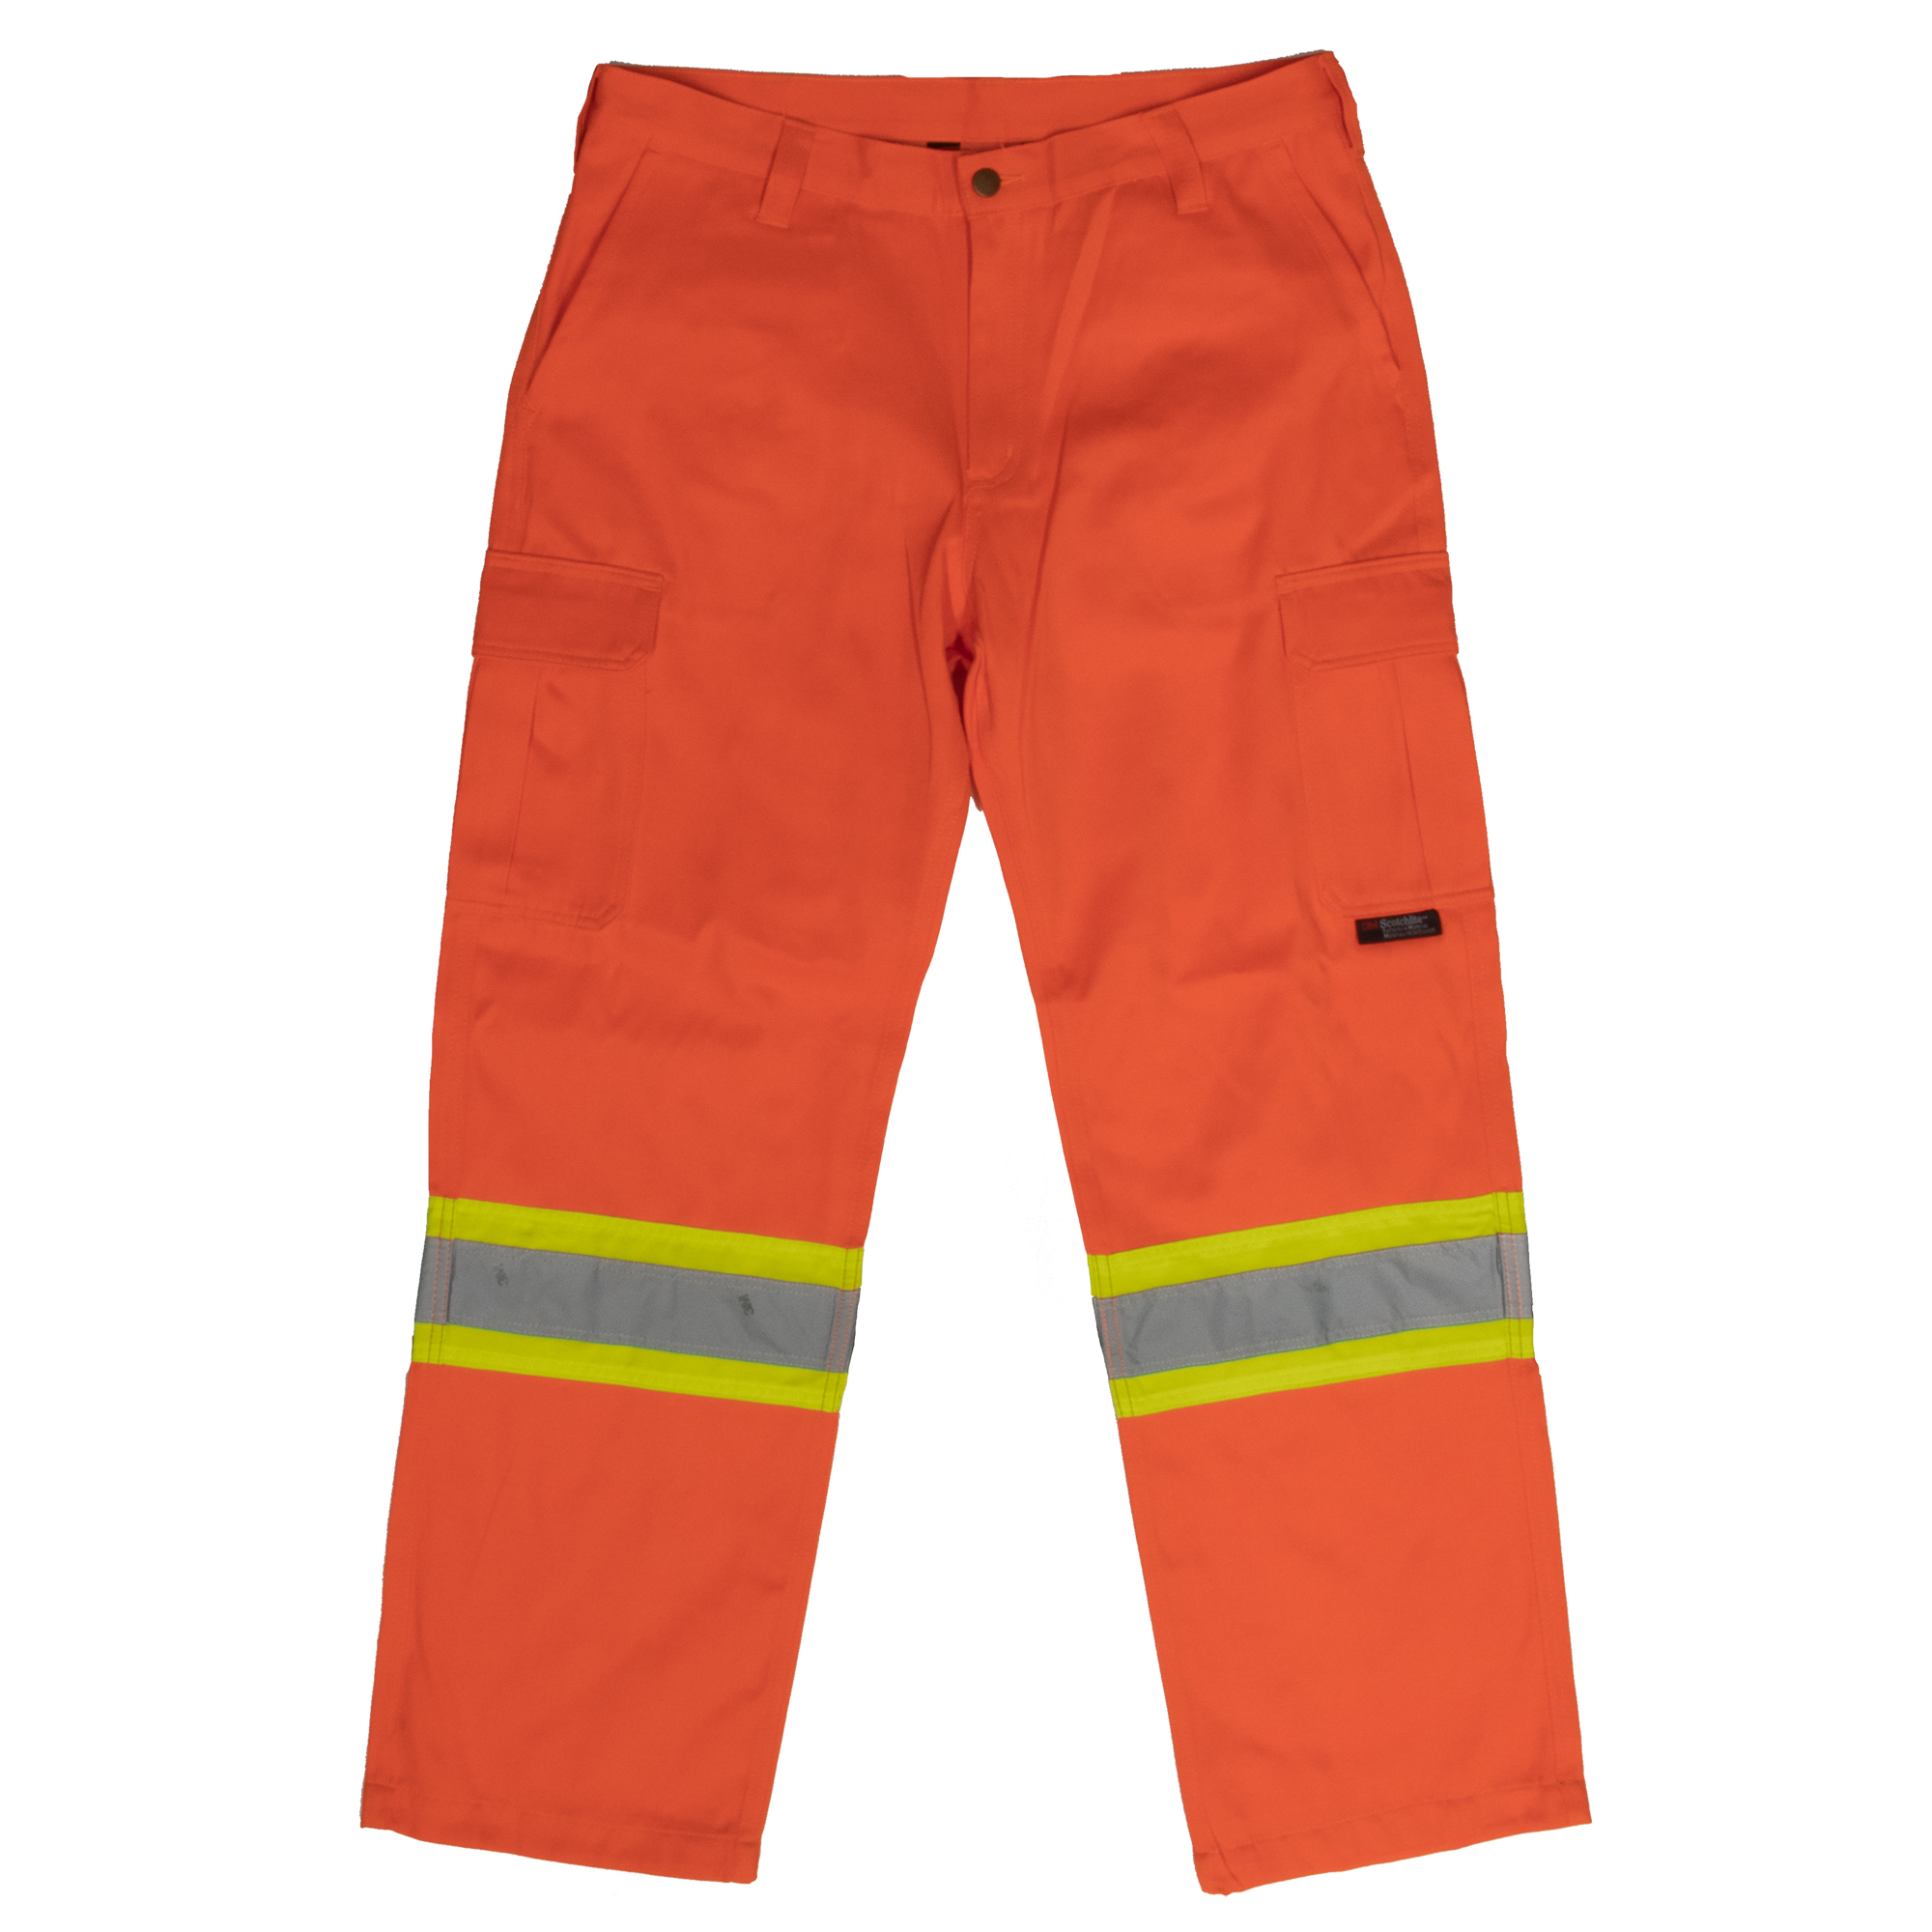 Tough Duck, Safety Cargo Work Pant, Waist 36 in, Inseam 34 in, Color Fluorescent Orange, Model SP013